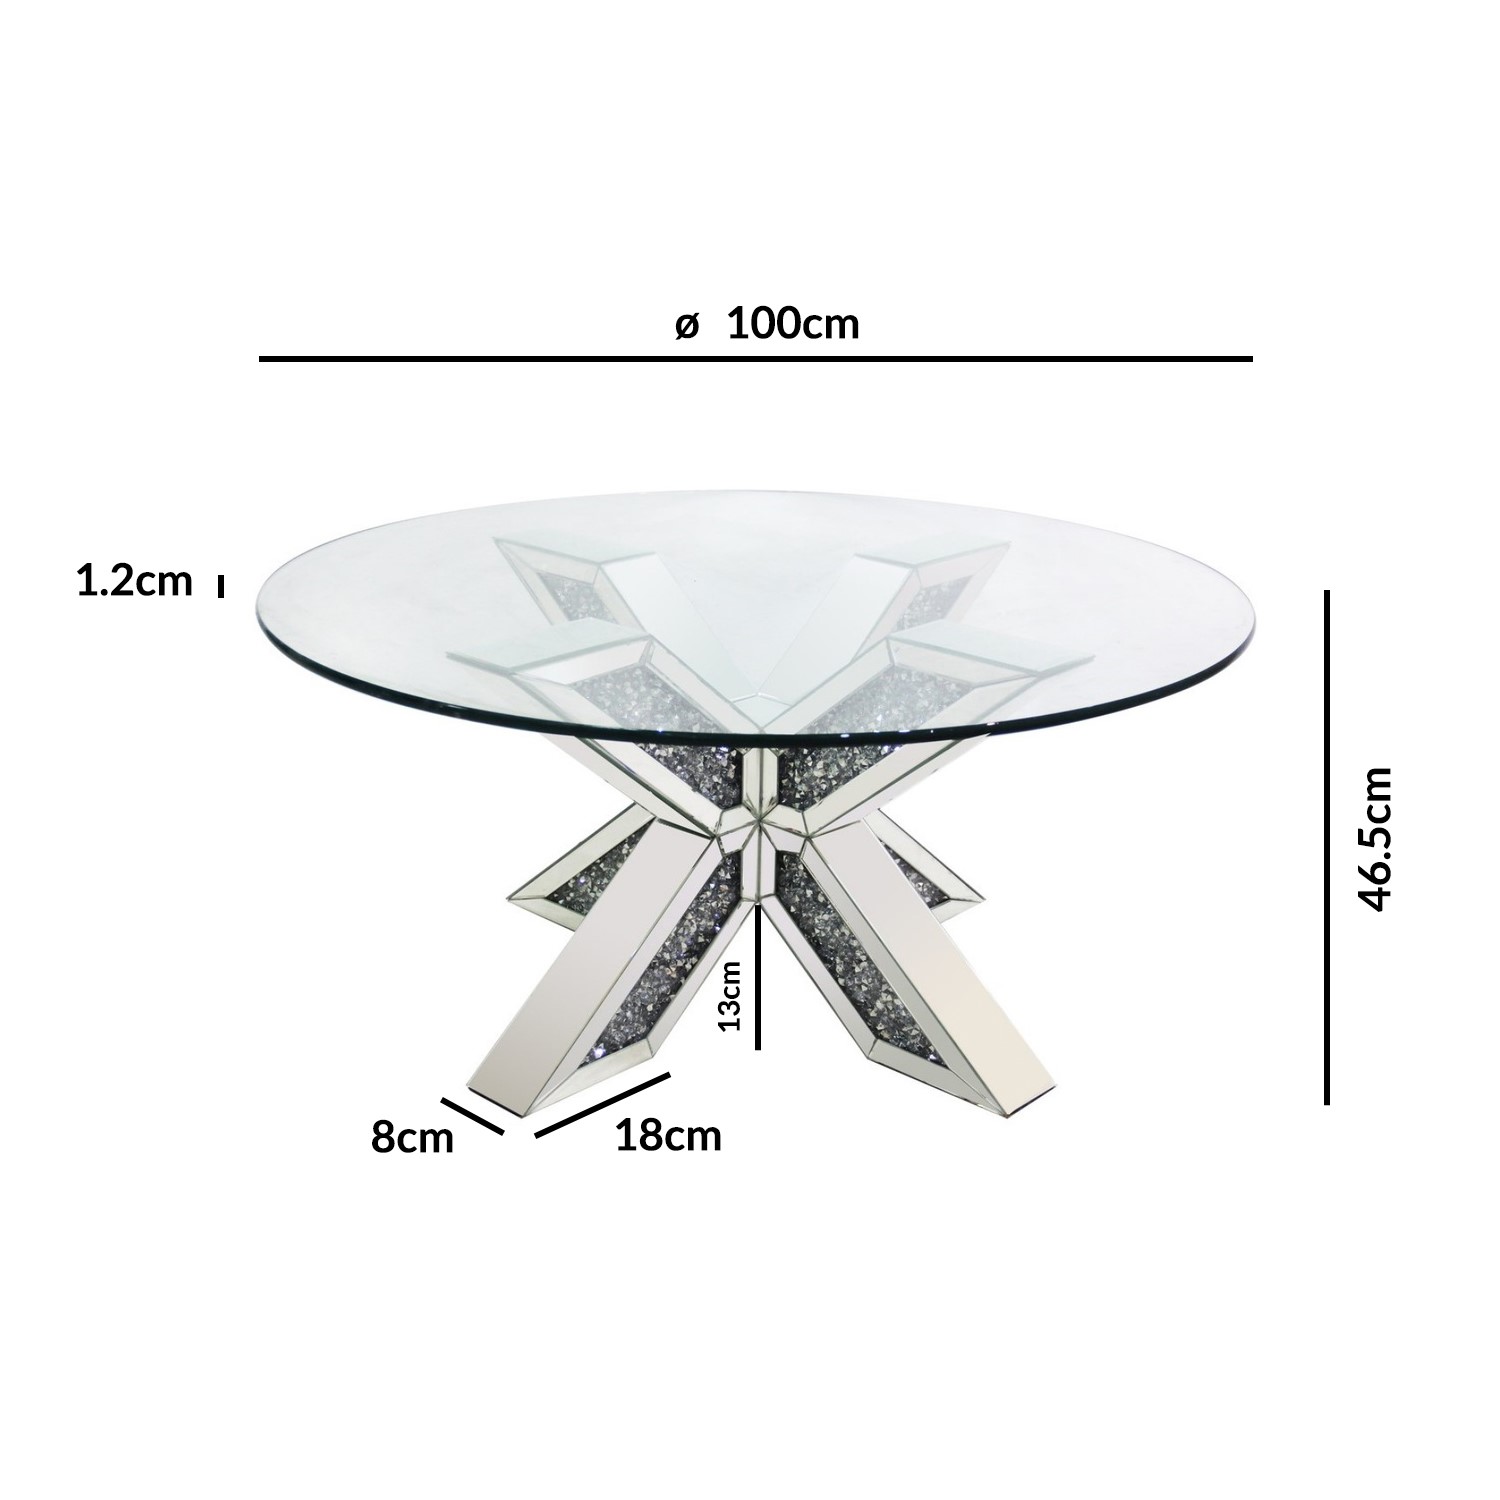 Read more about Small round glass top coffee table jade boutique